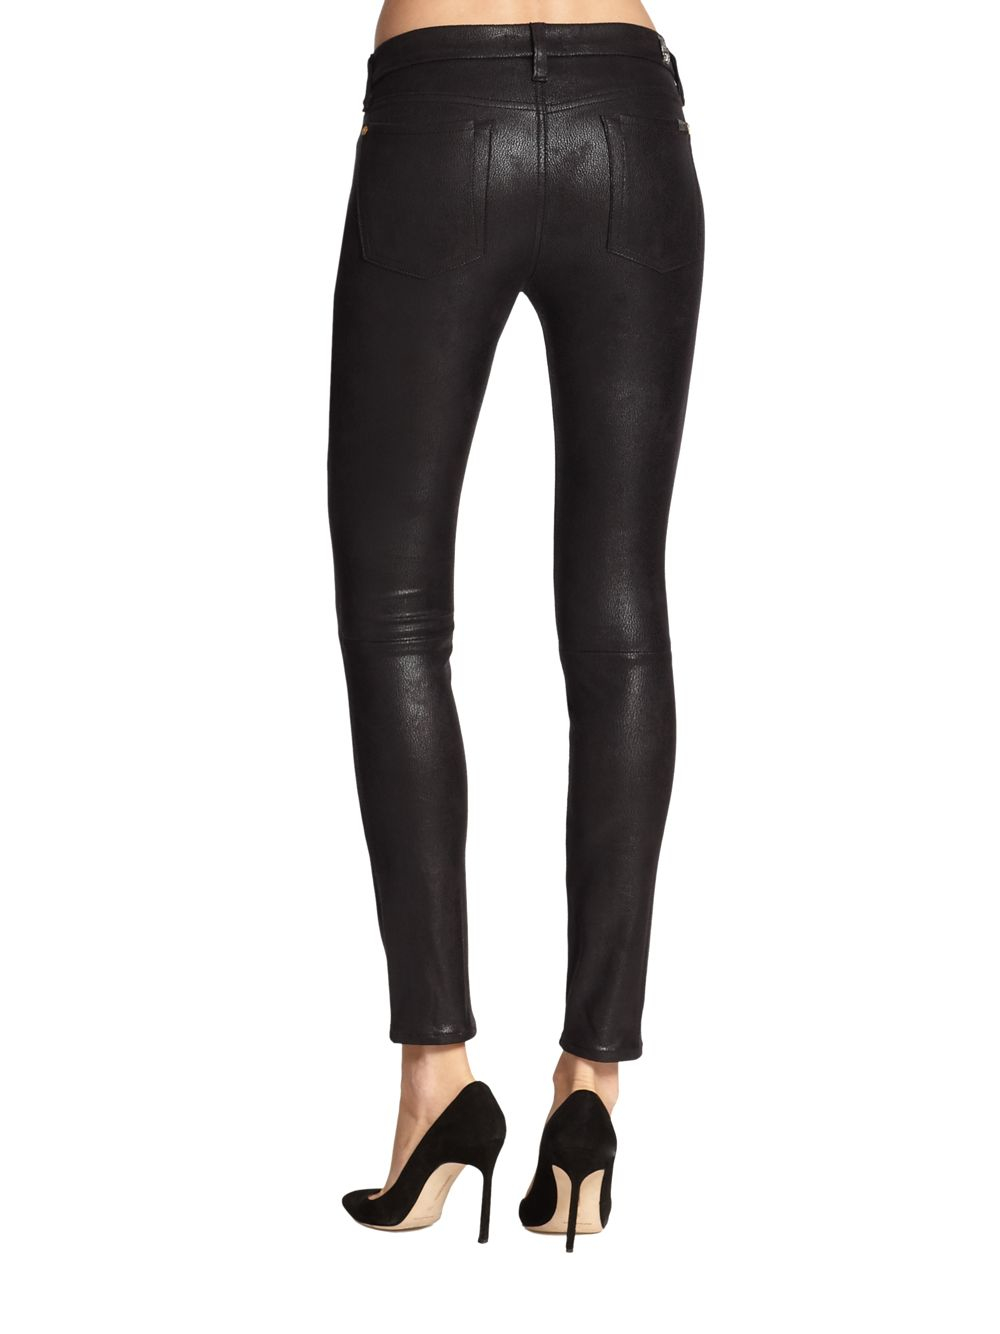 7 For All Mankind Crackle Leather-look Coated Skinny Jeans in Black | Lyst